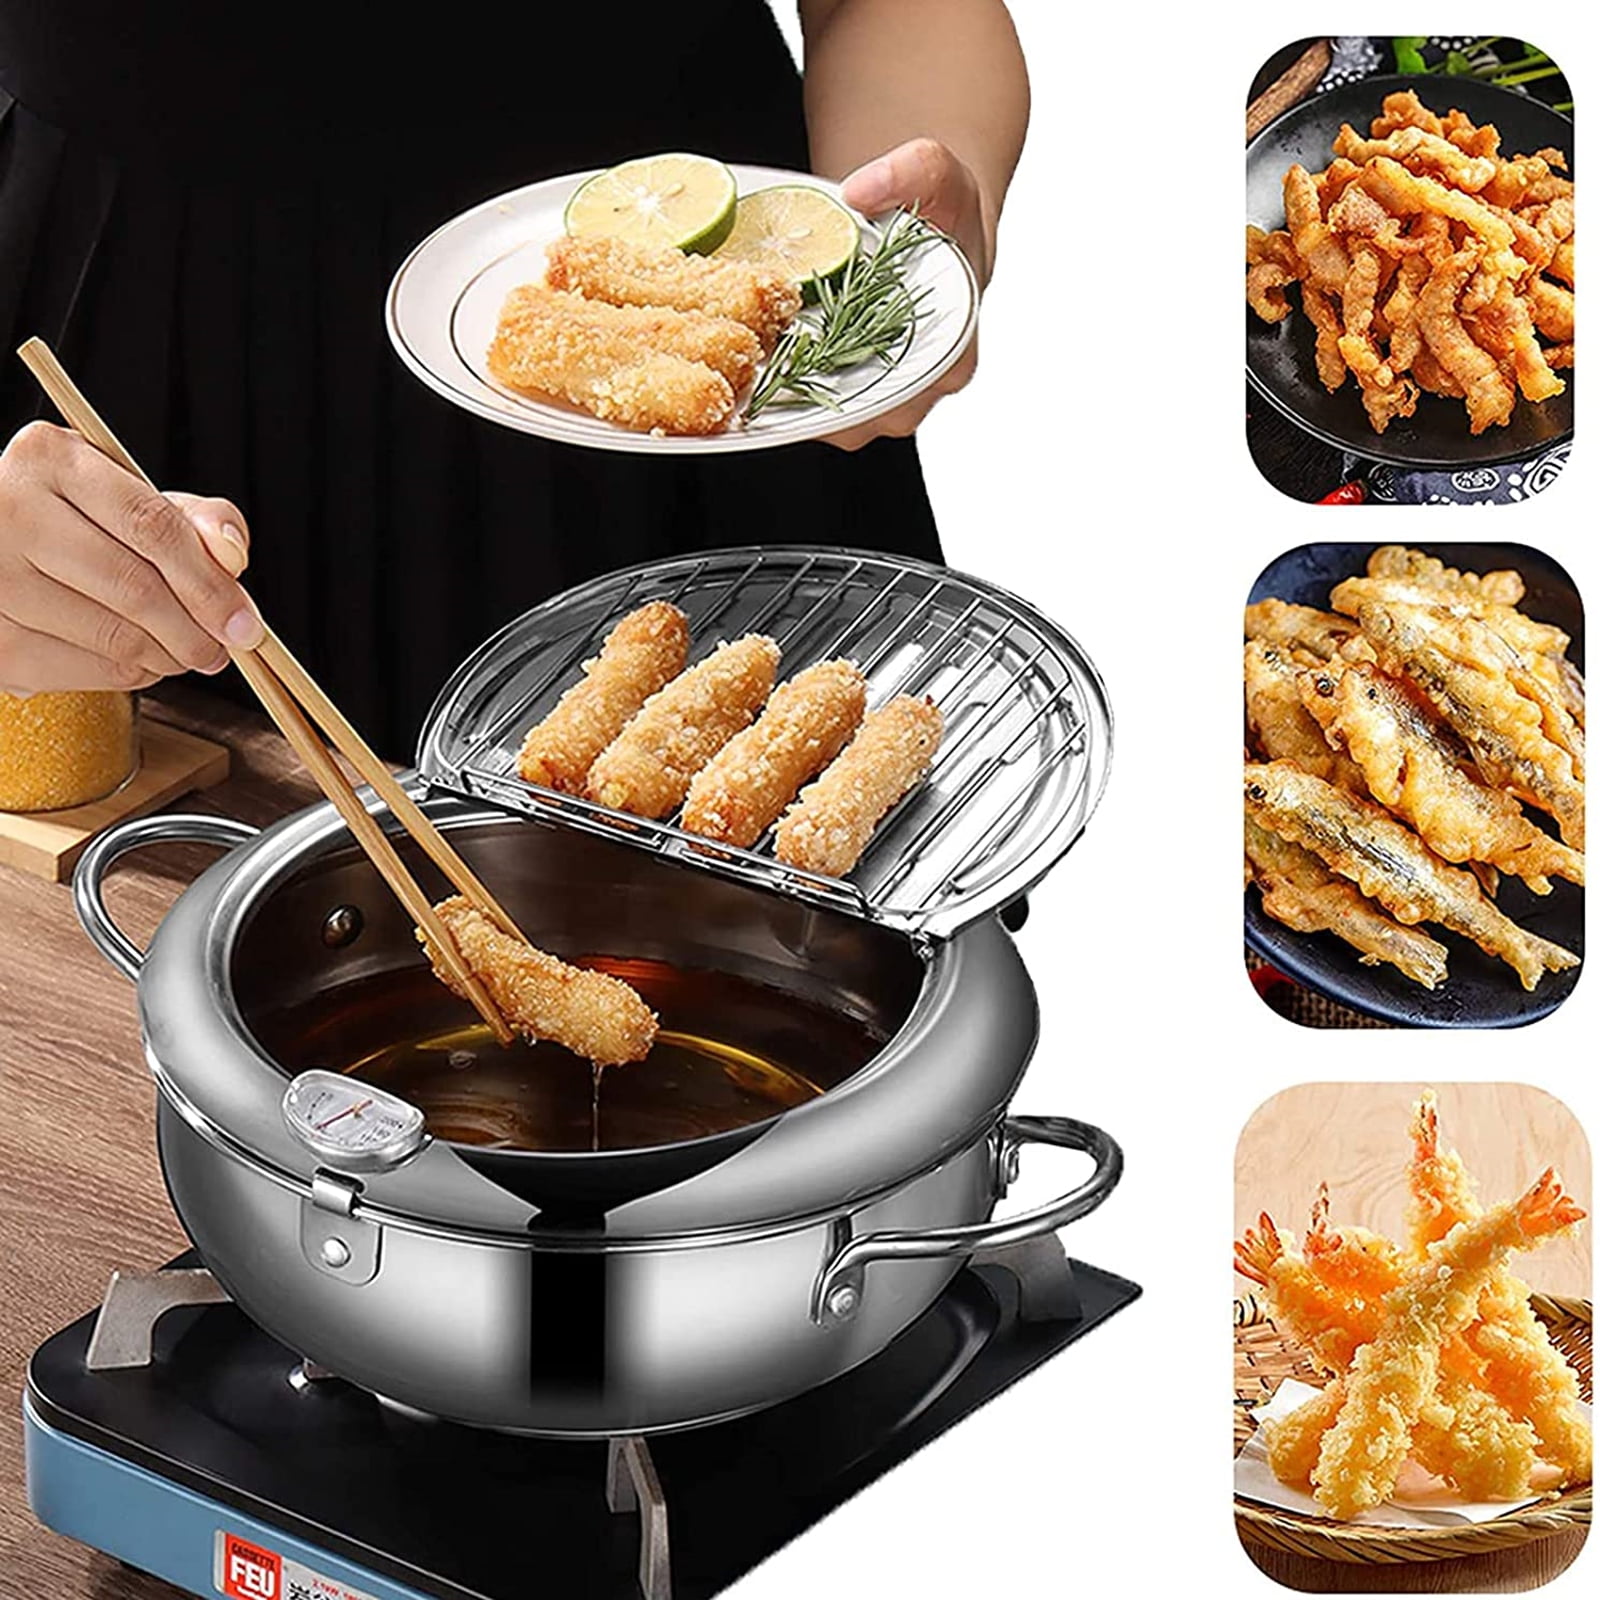 Deep Frying Pan,Japanese StyleTempura Fryer Pot,Mini Deep Fry Pan with Drainer,Non-stick coating Frying Pan with Thermometer,Lid And Oil Drip Drainer Rack for Kitchen Cooking 24cm/304 